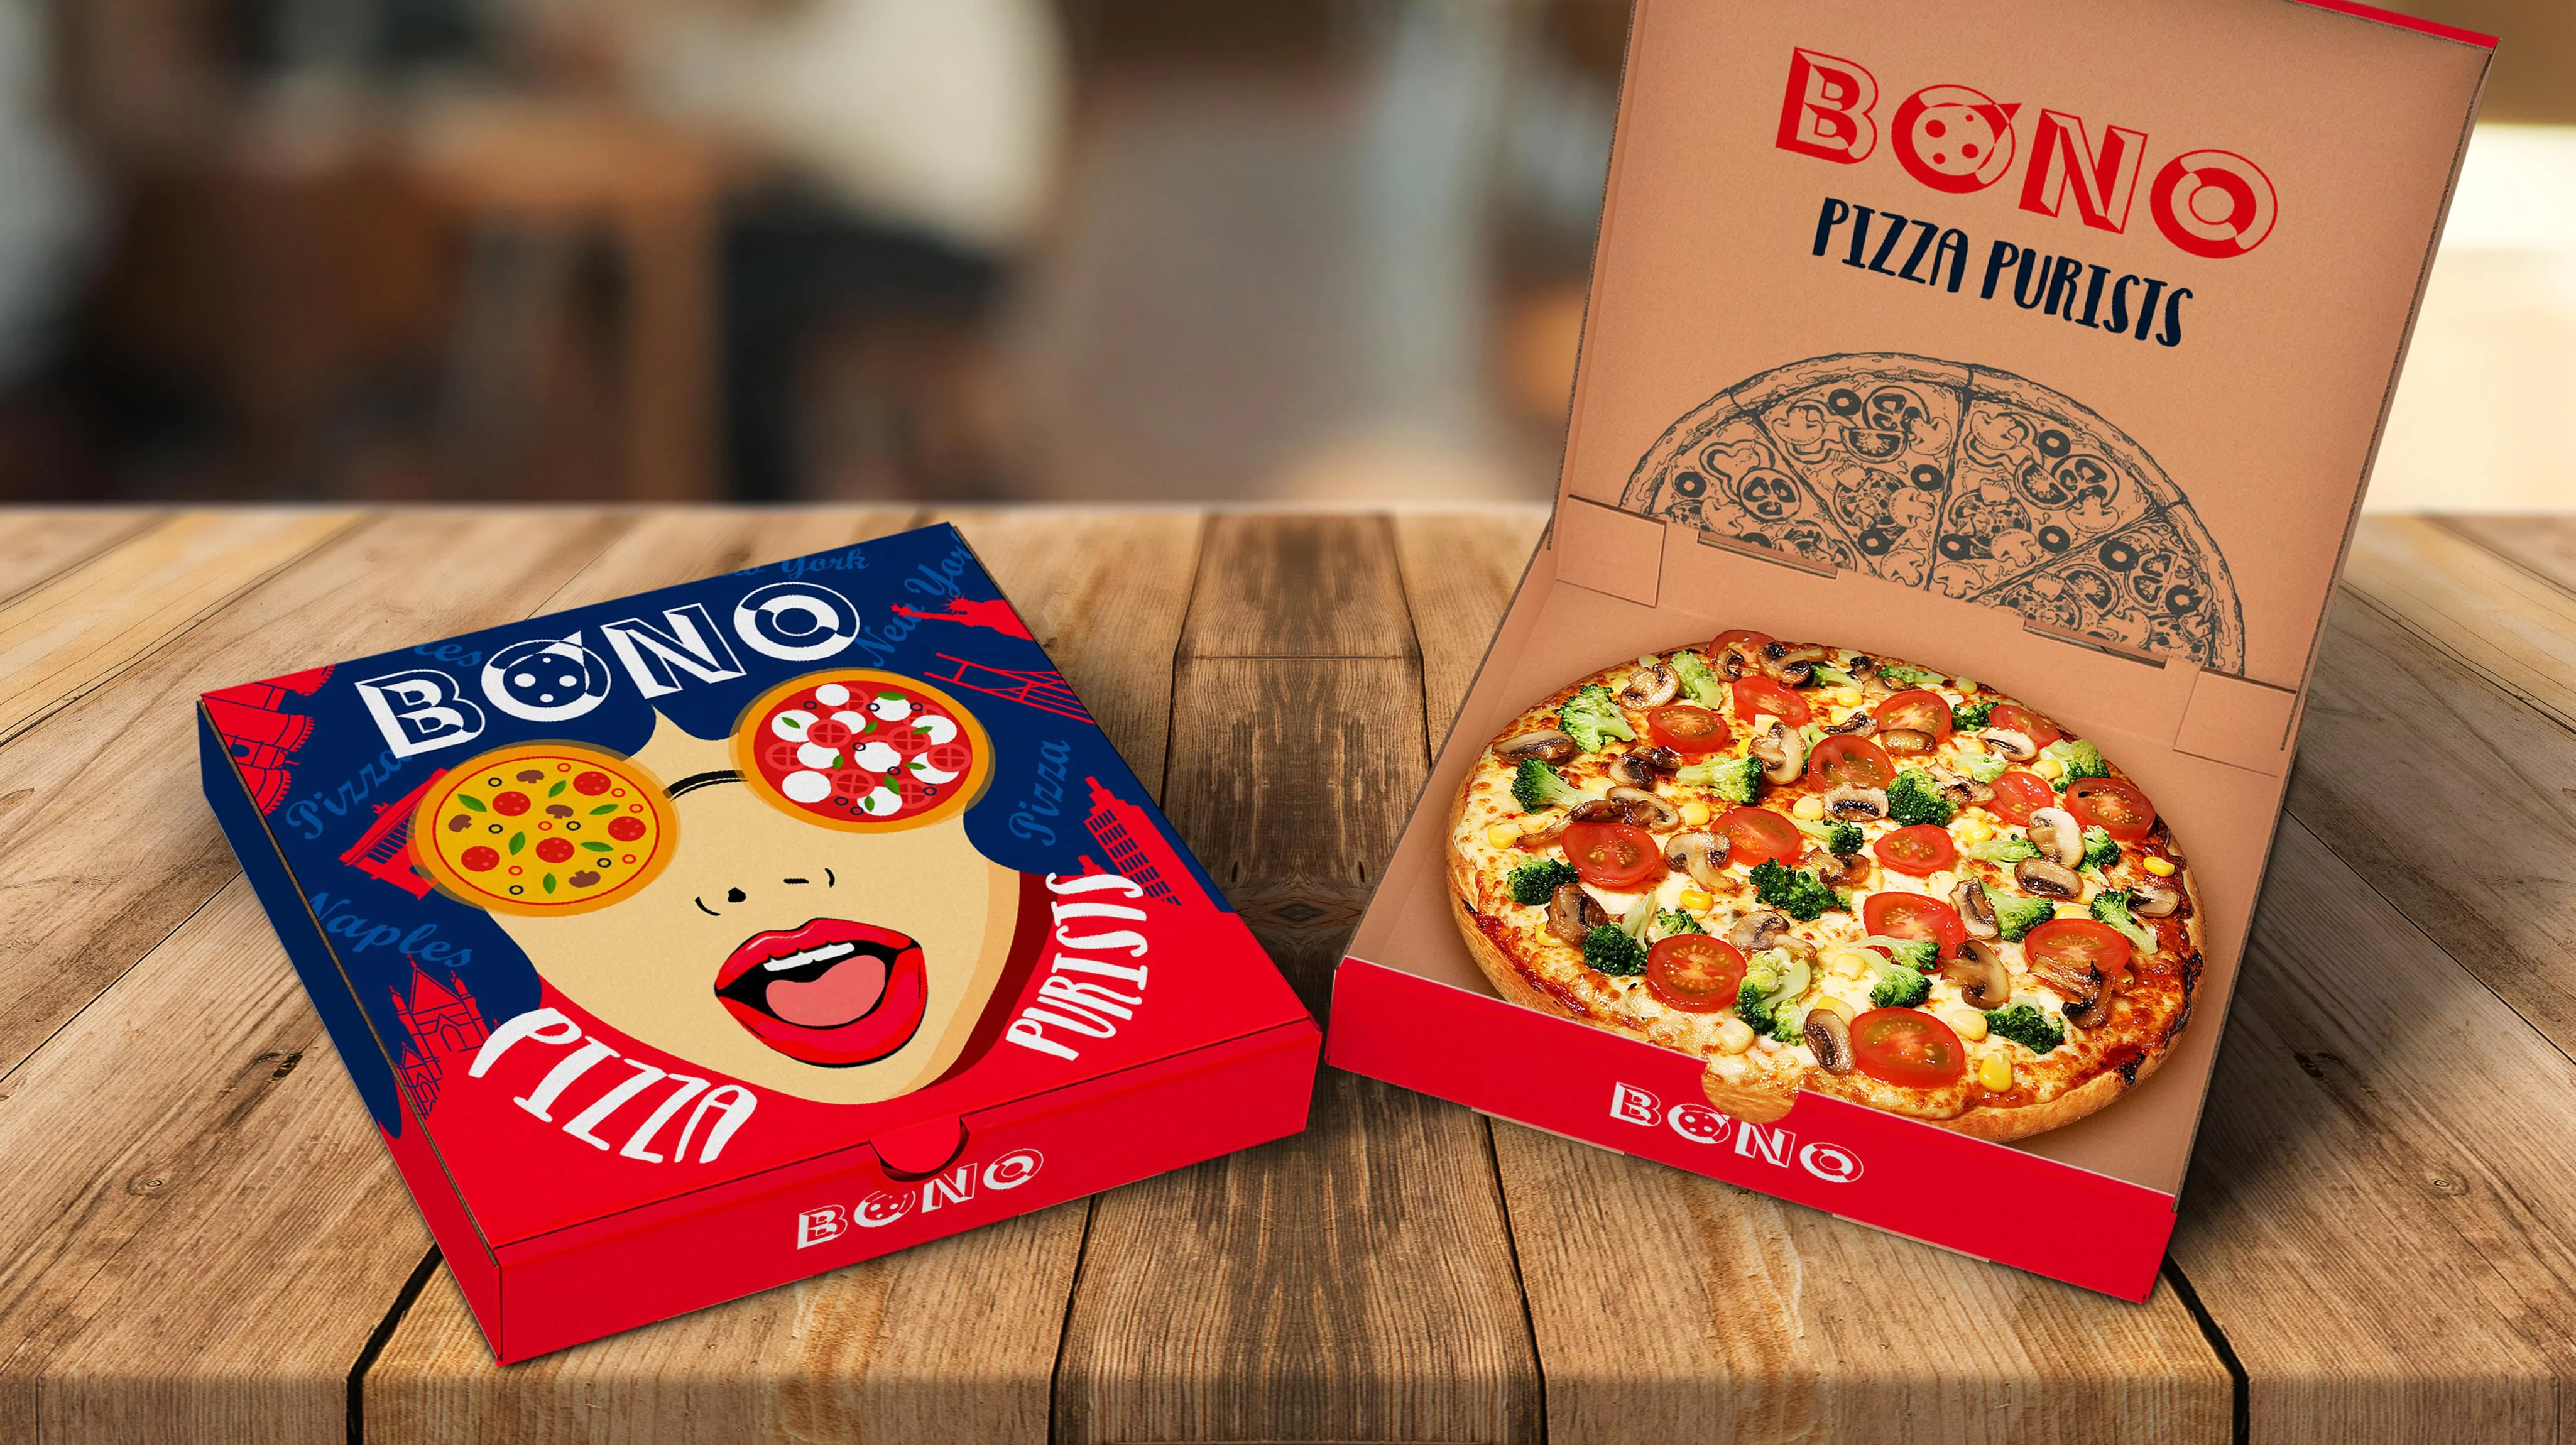 Bono pizza Packaging